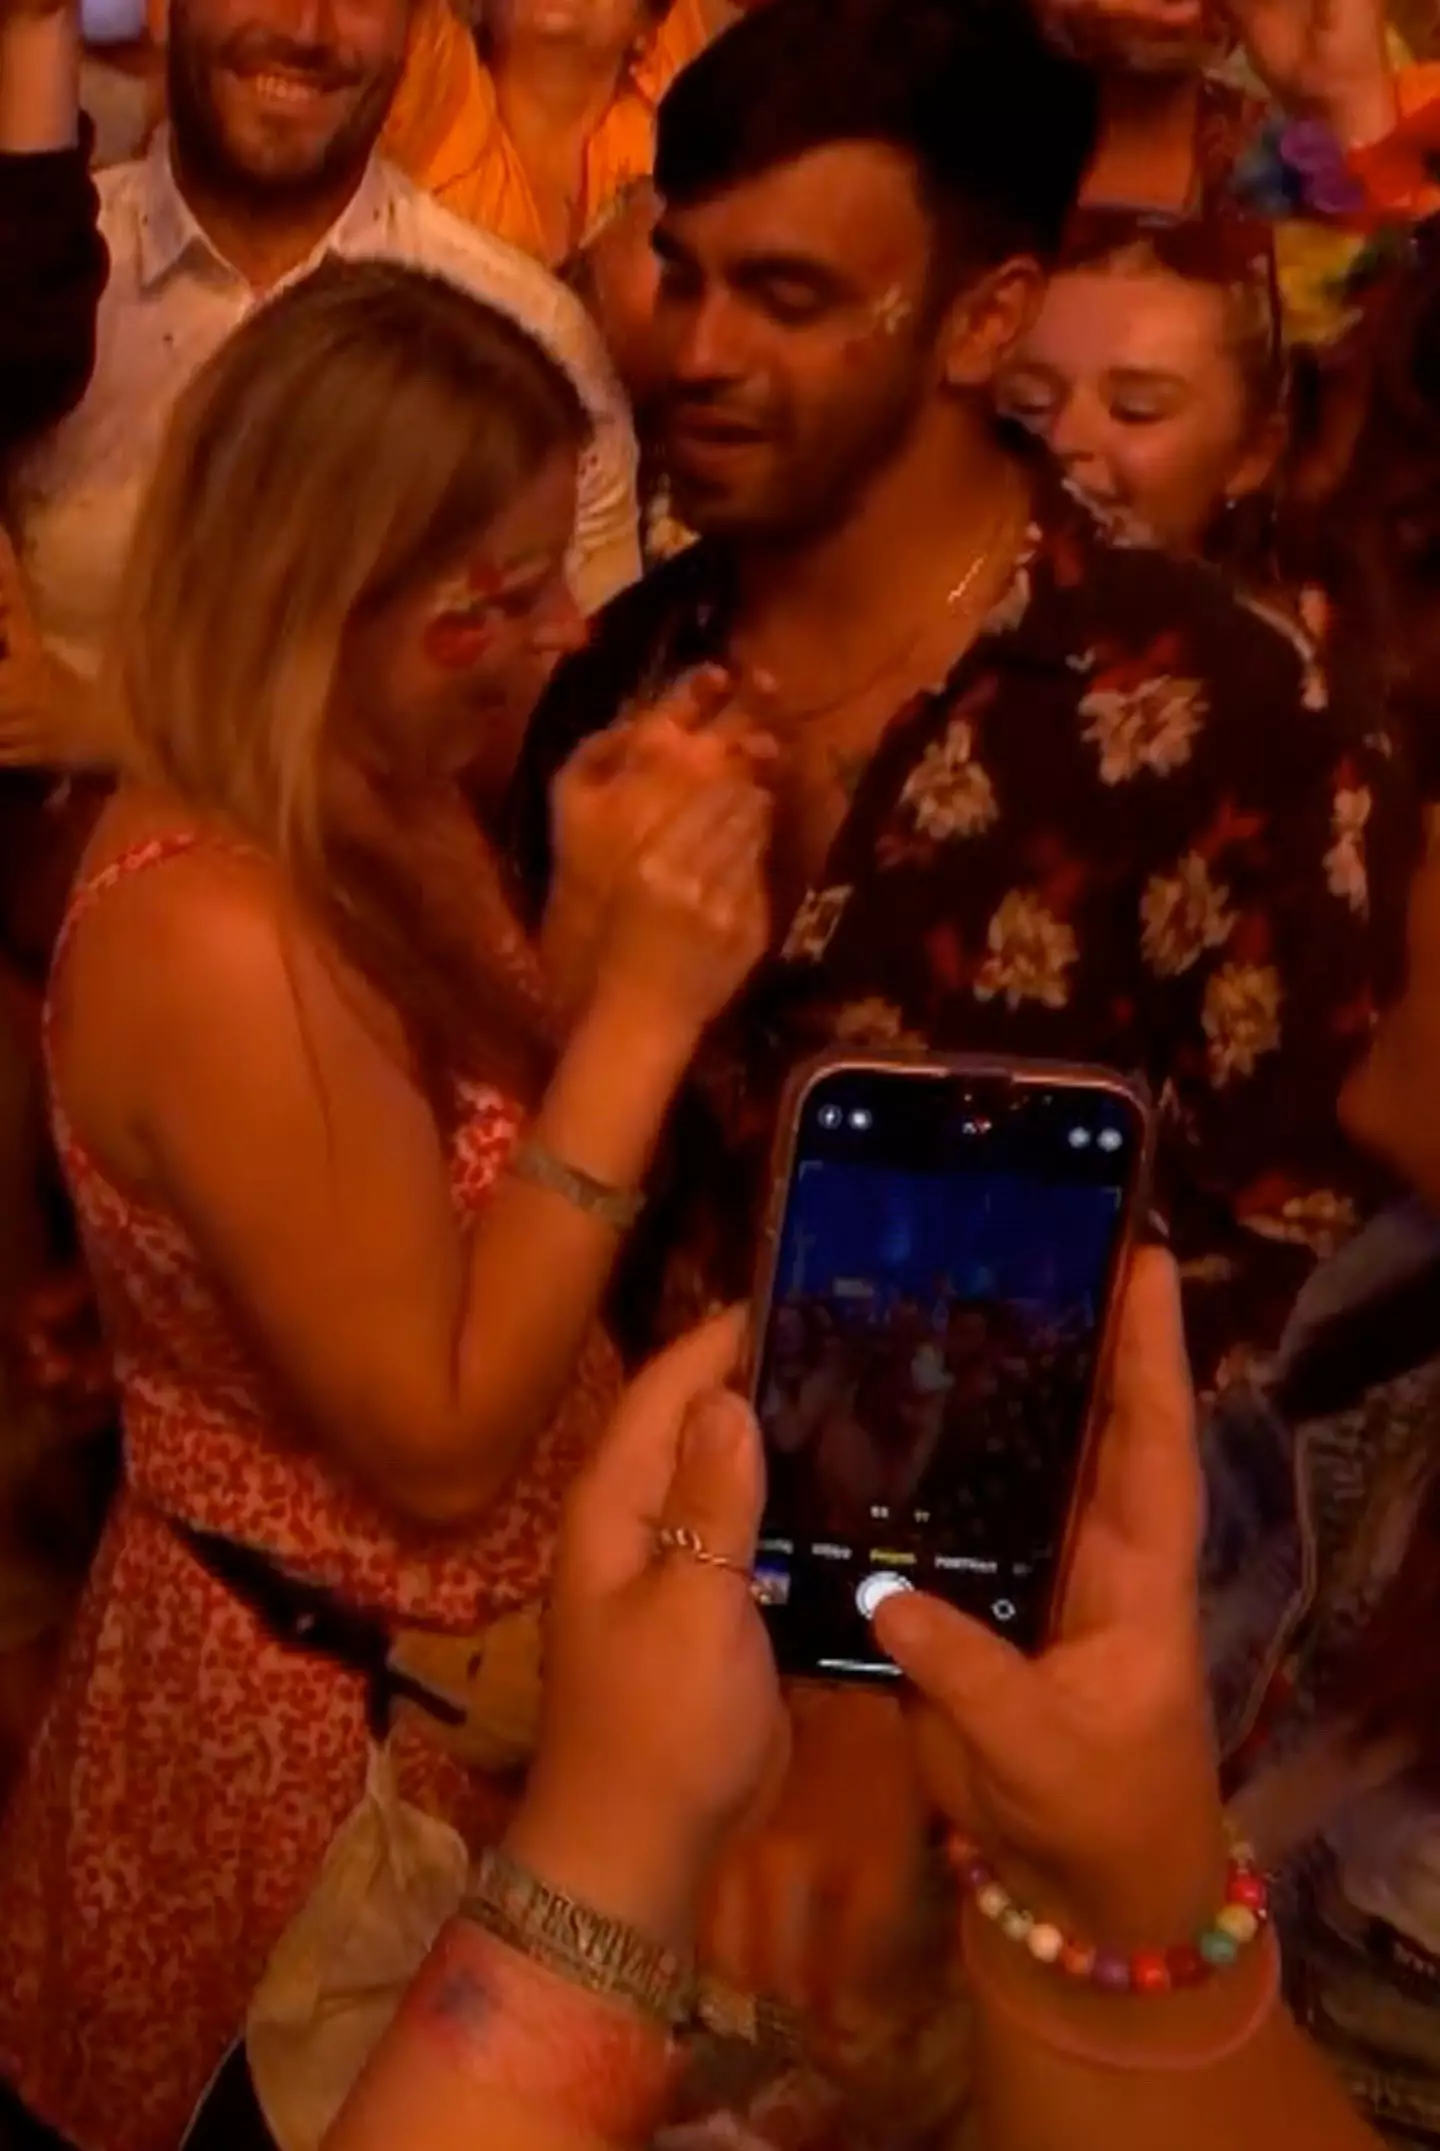 Viewers spotted one couple seemingly getting engaged during Elton's set.